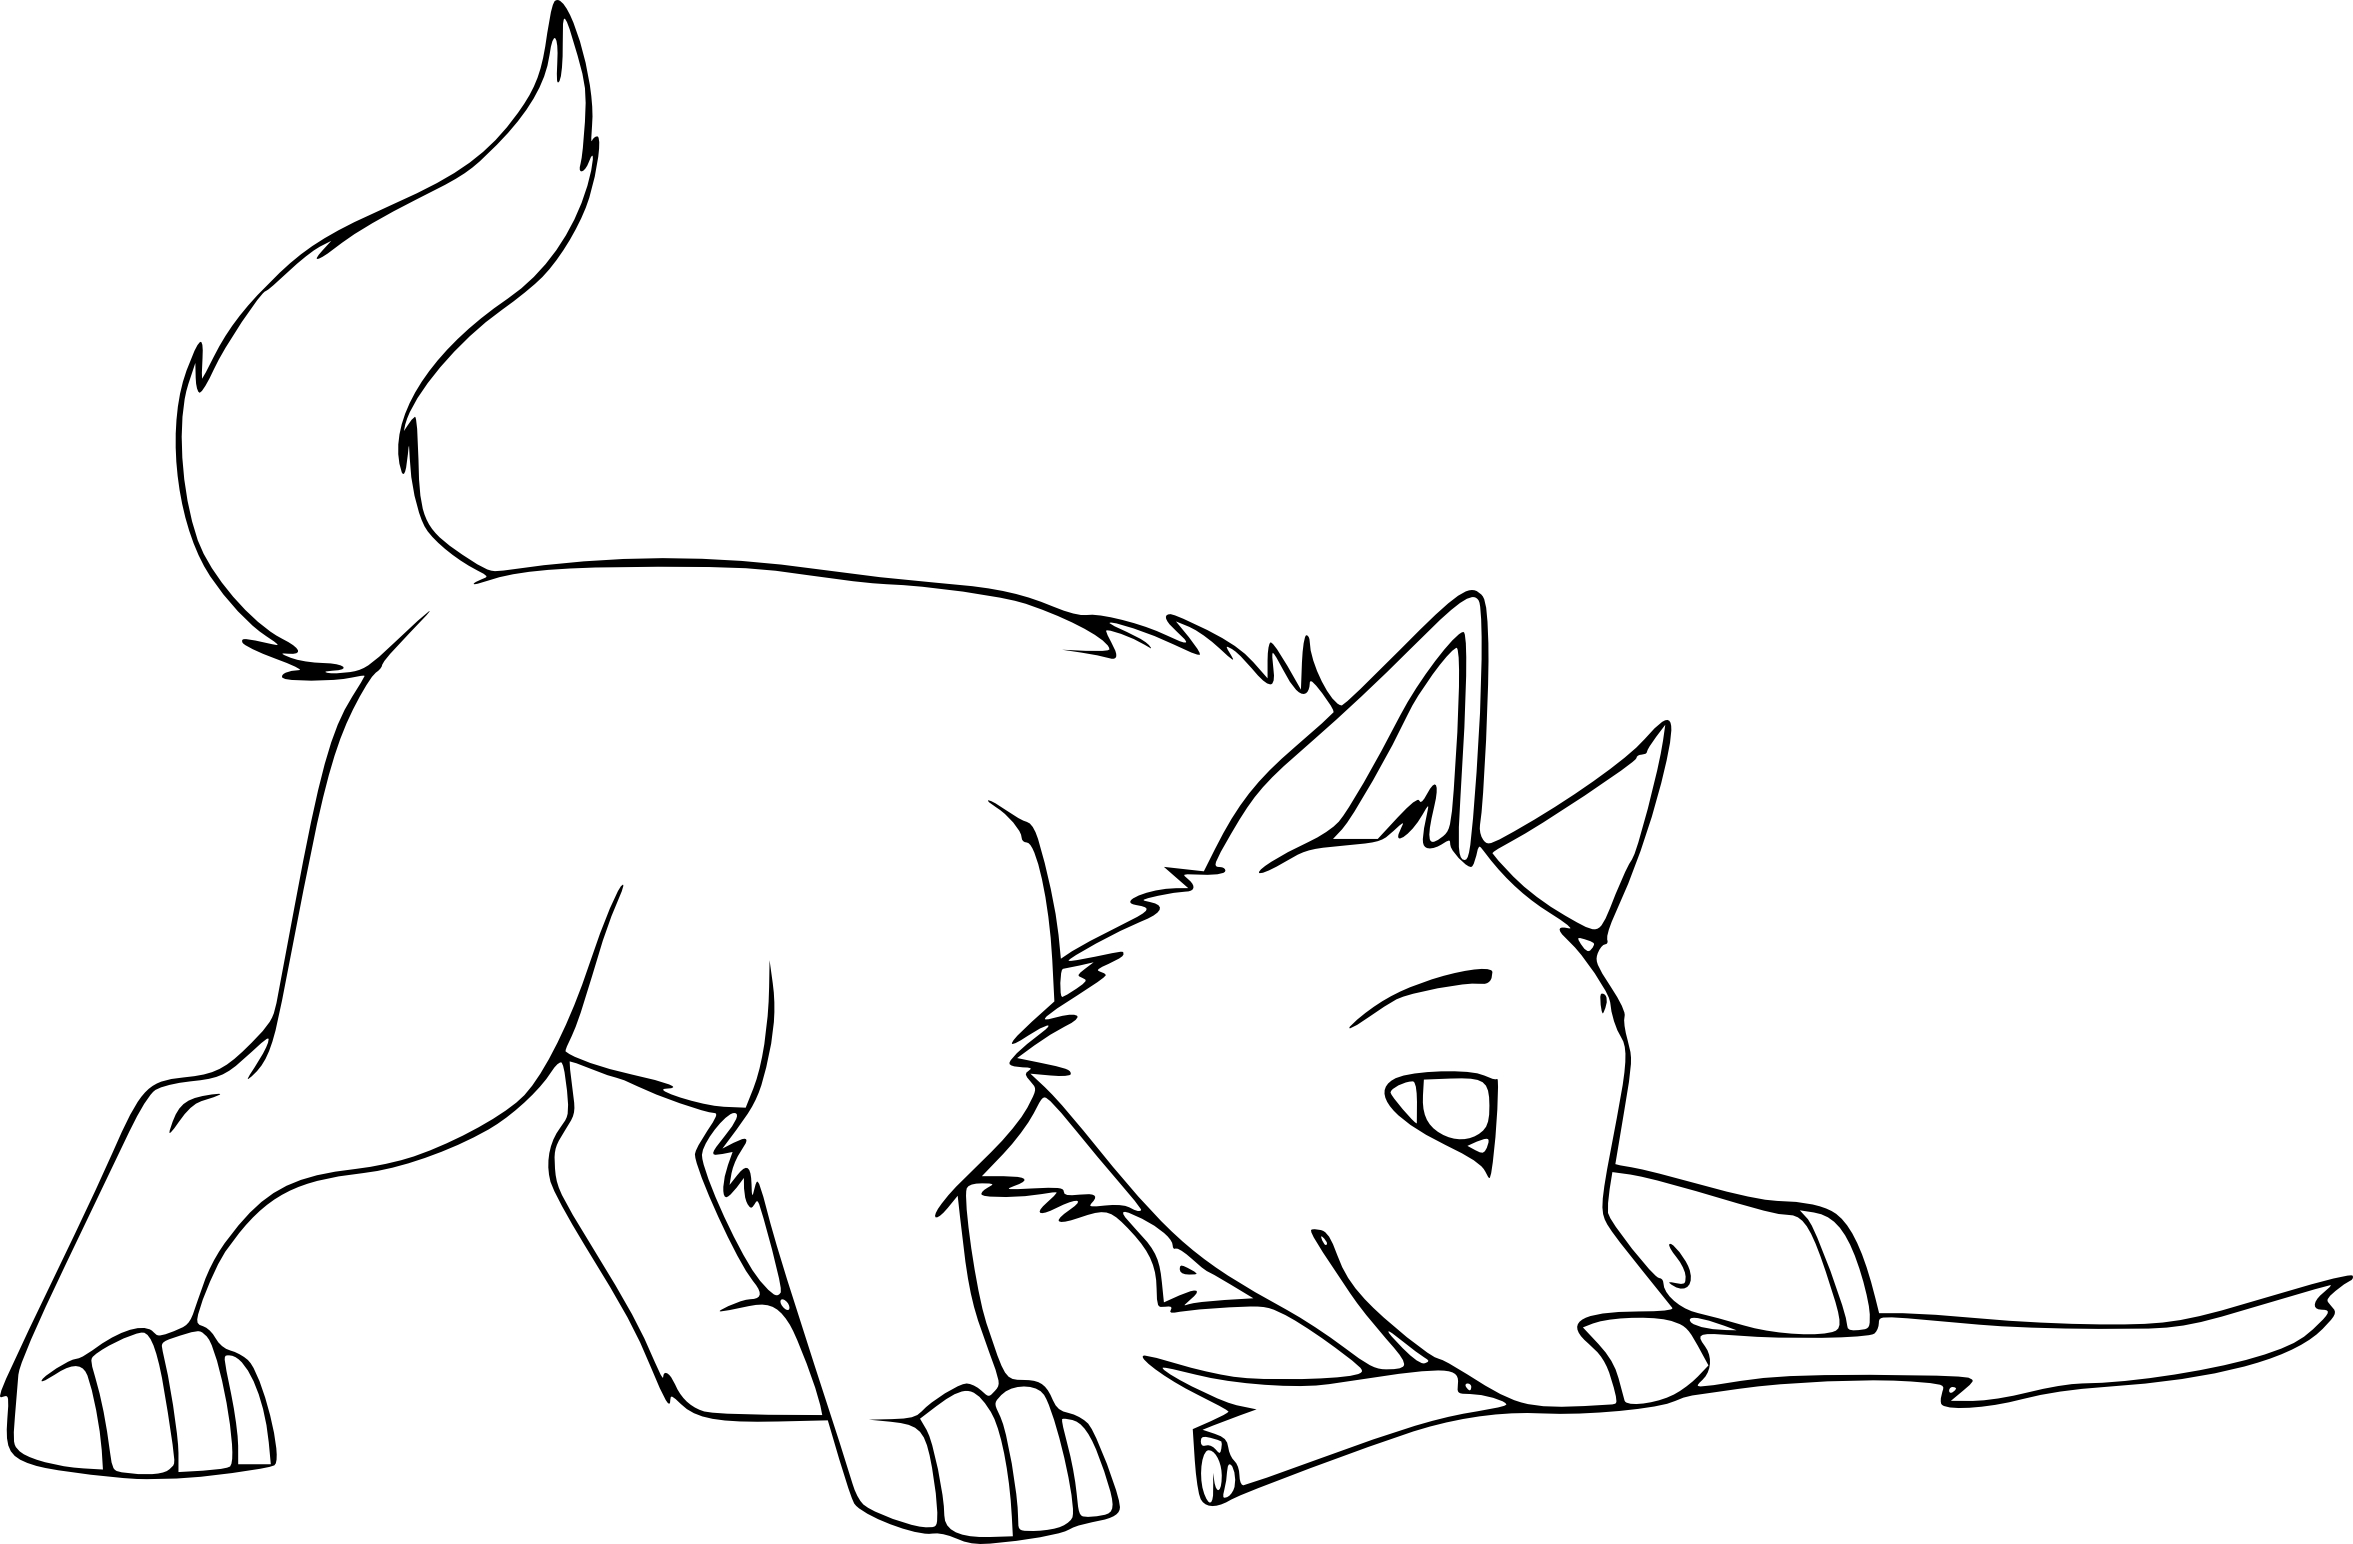 Cub Scout coloring page